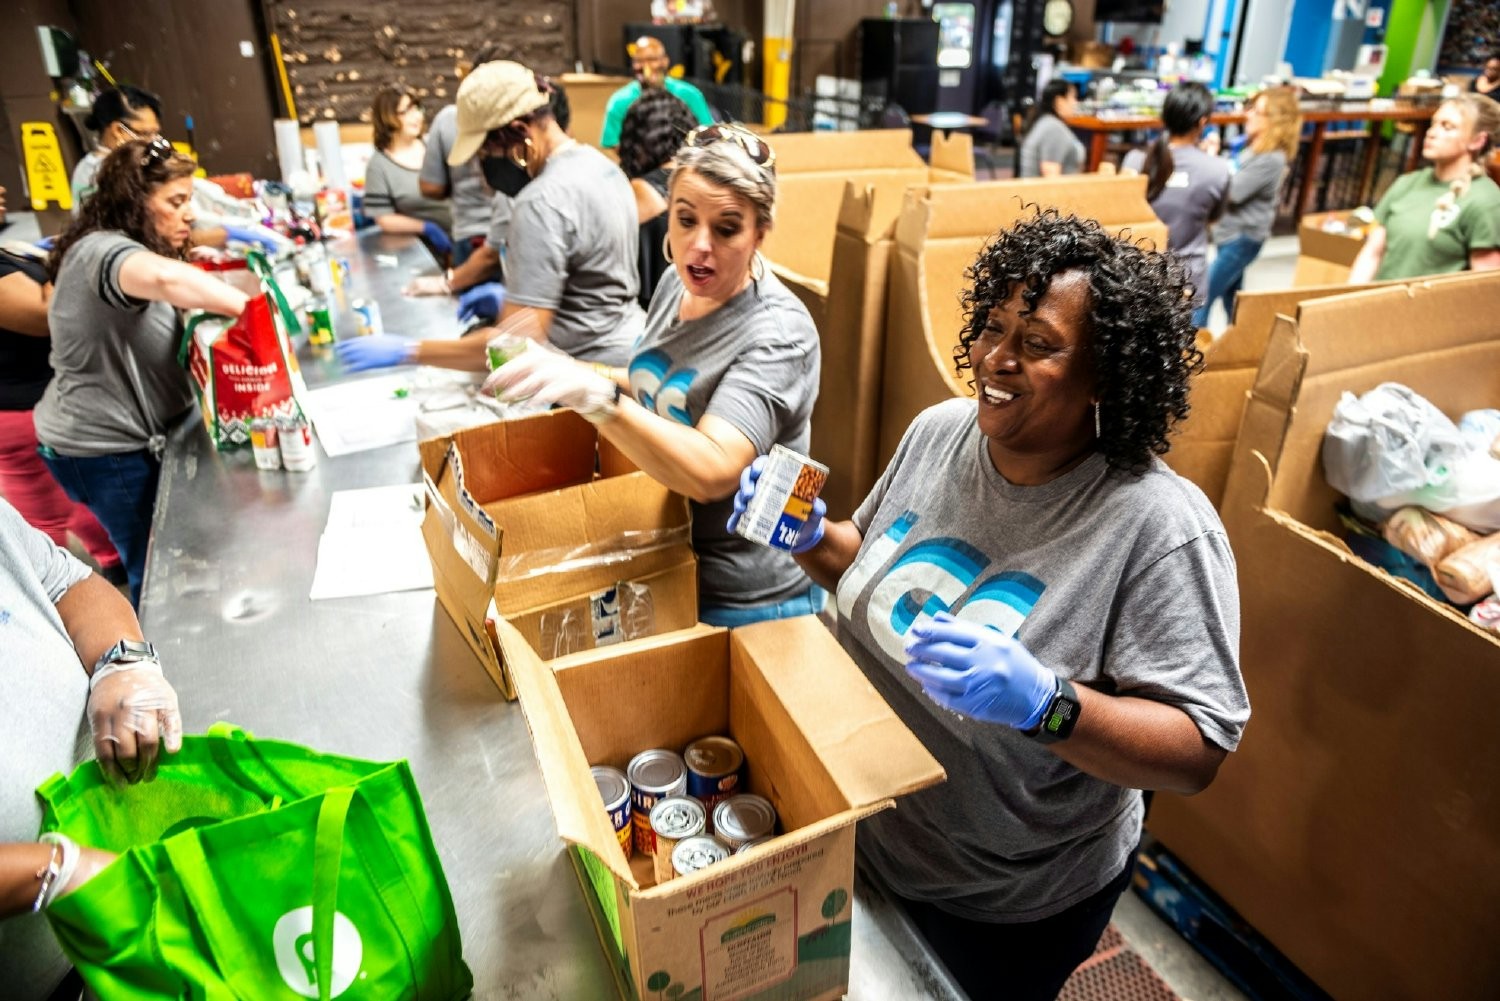 Our annual Day of Service allows everyone to spend a business day supporting communities where we live and work.